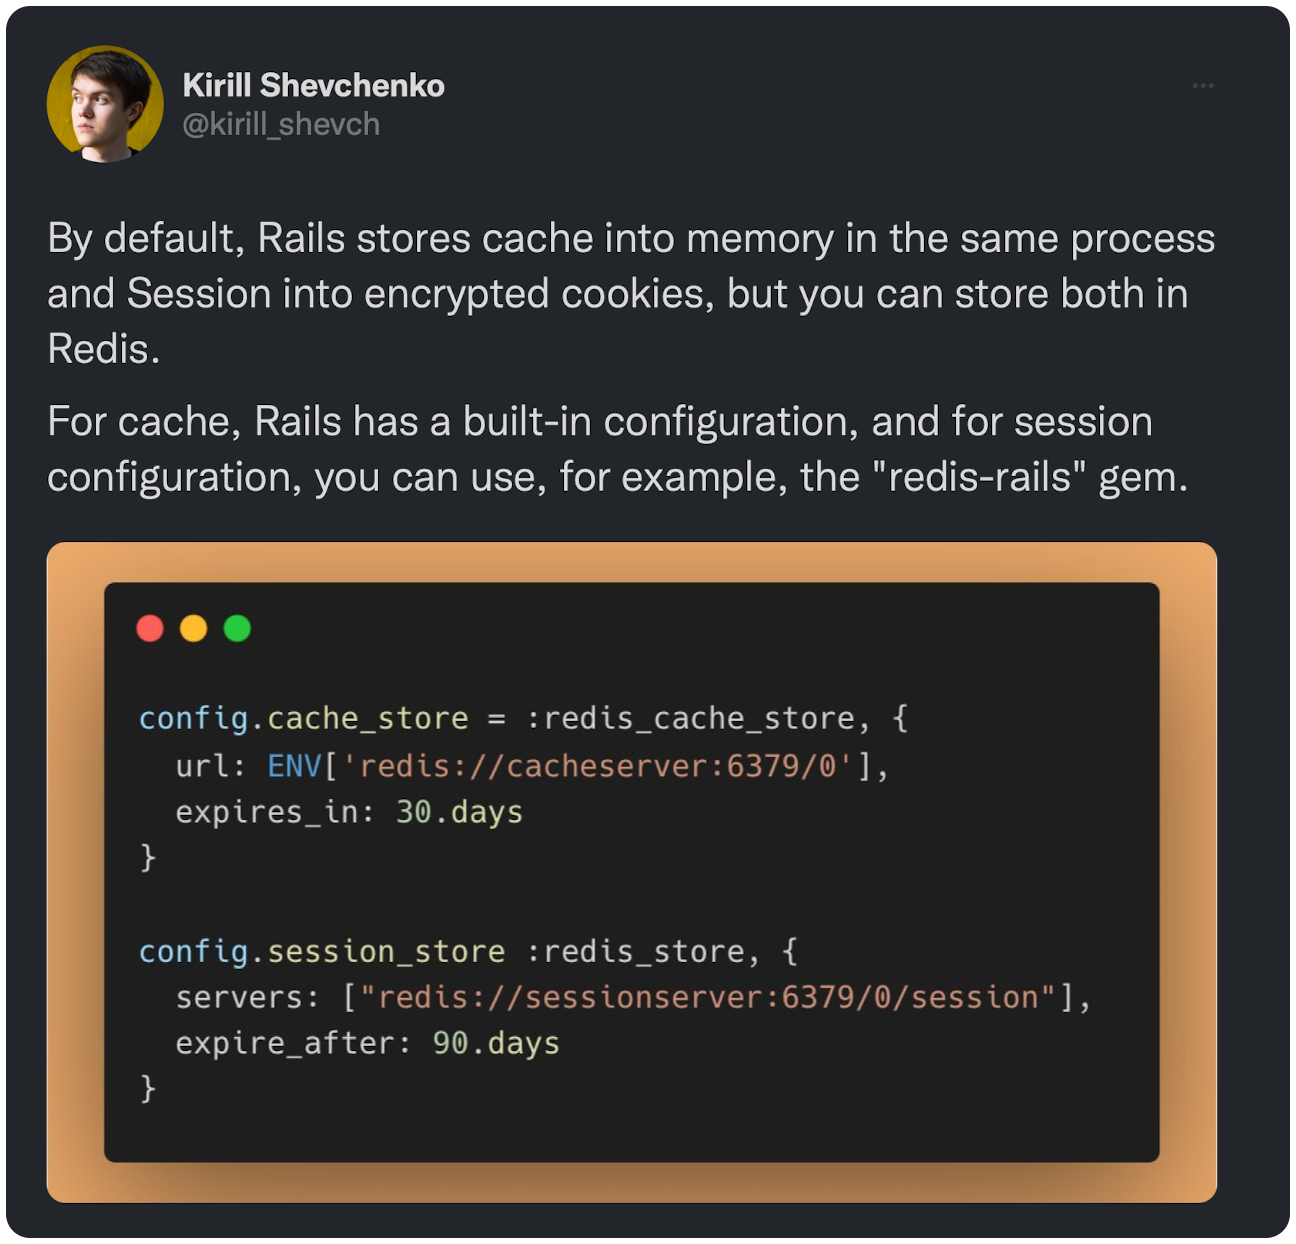 By default, Rails stores cache into memory in the same process and Session into encrypted cookies, but you can store both in Redis. For cache, Rails has a built-in configuration, and for session configuration, you can use, for example, the "redis-rails" gem